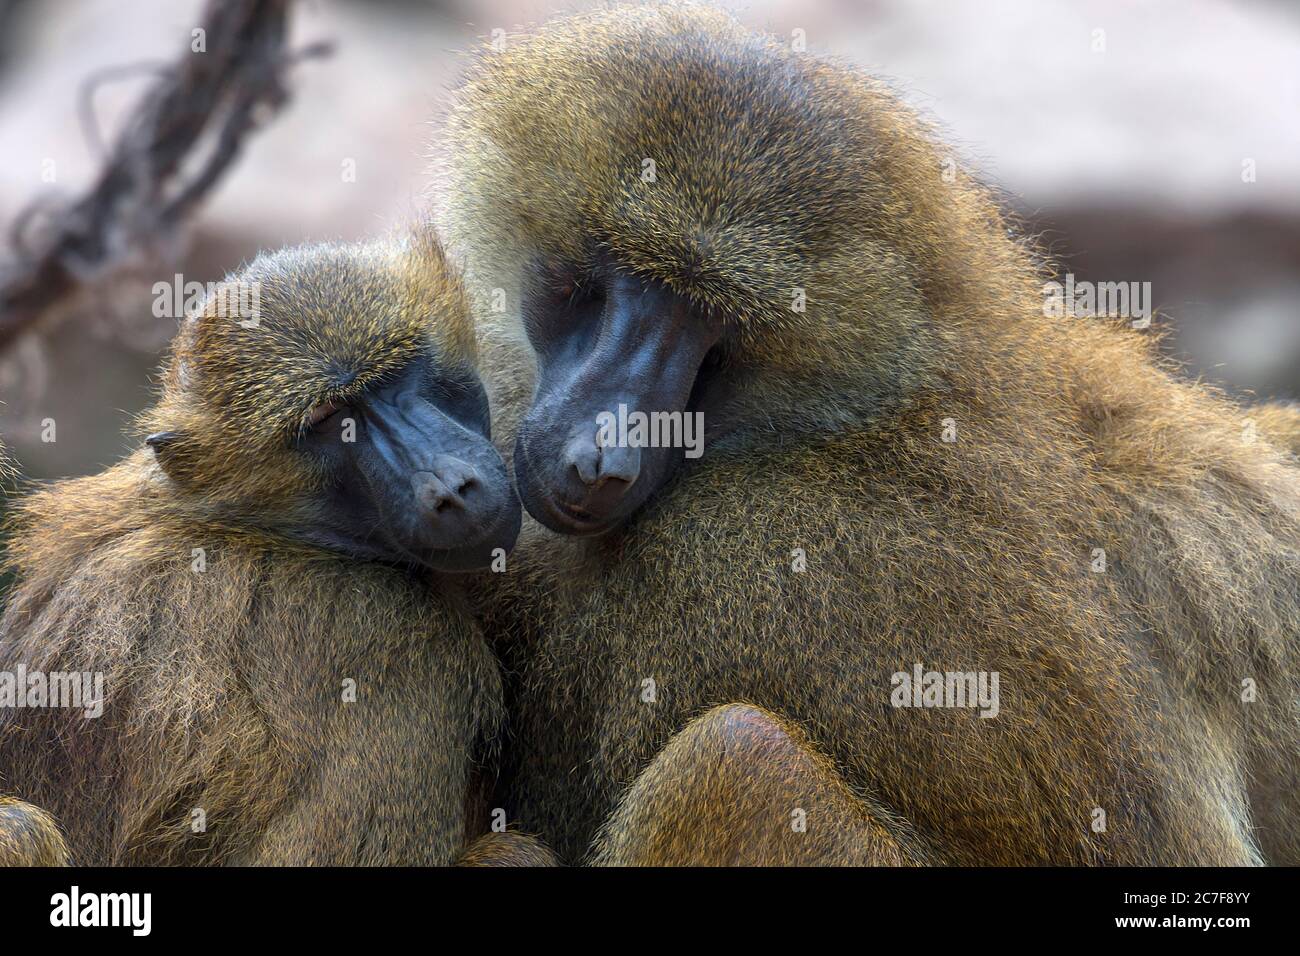 Two Guinea baboon also or (Papio papio), sleeping close together, Nuremberg Zoo, Middle Franconia, Bavaria, Germany Stock Photo